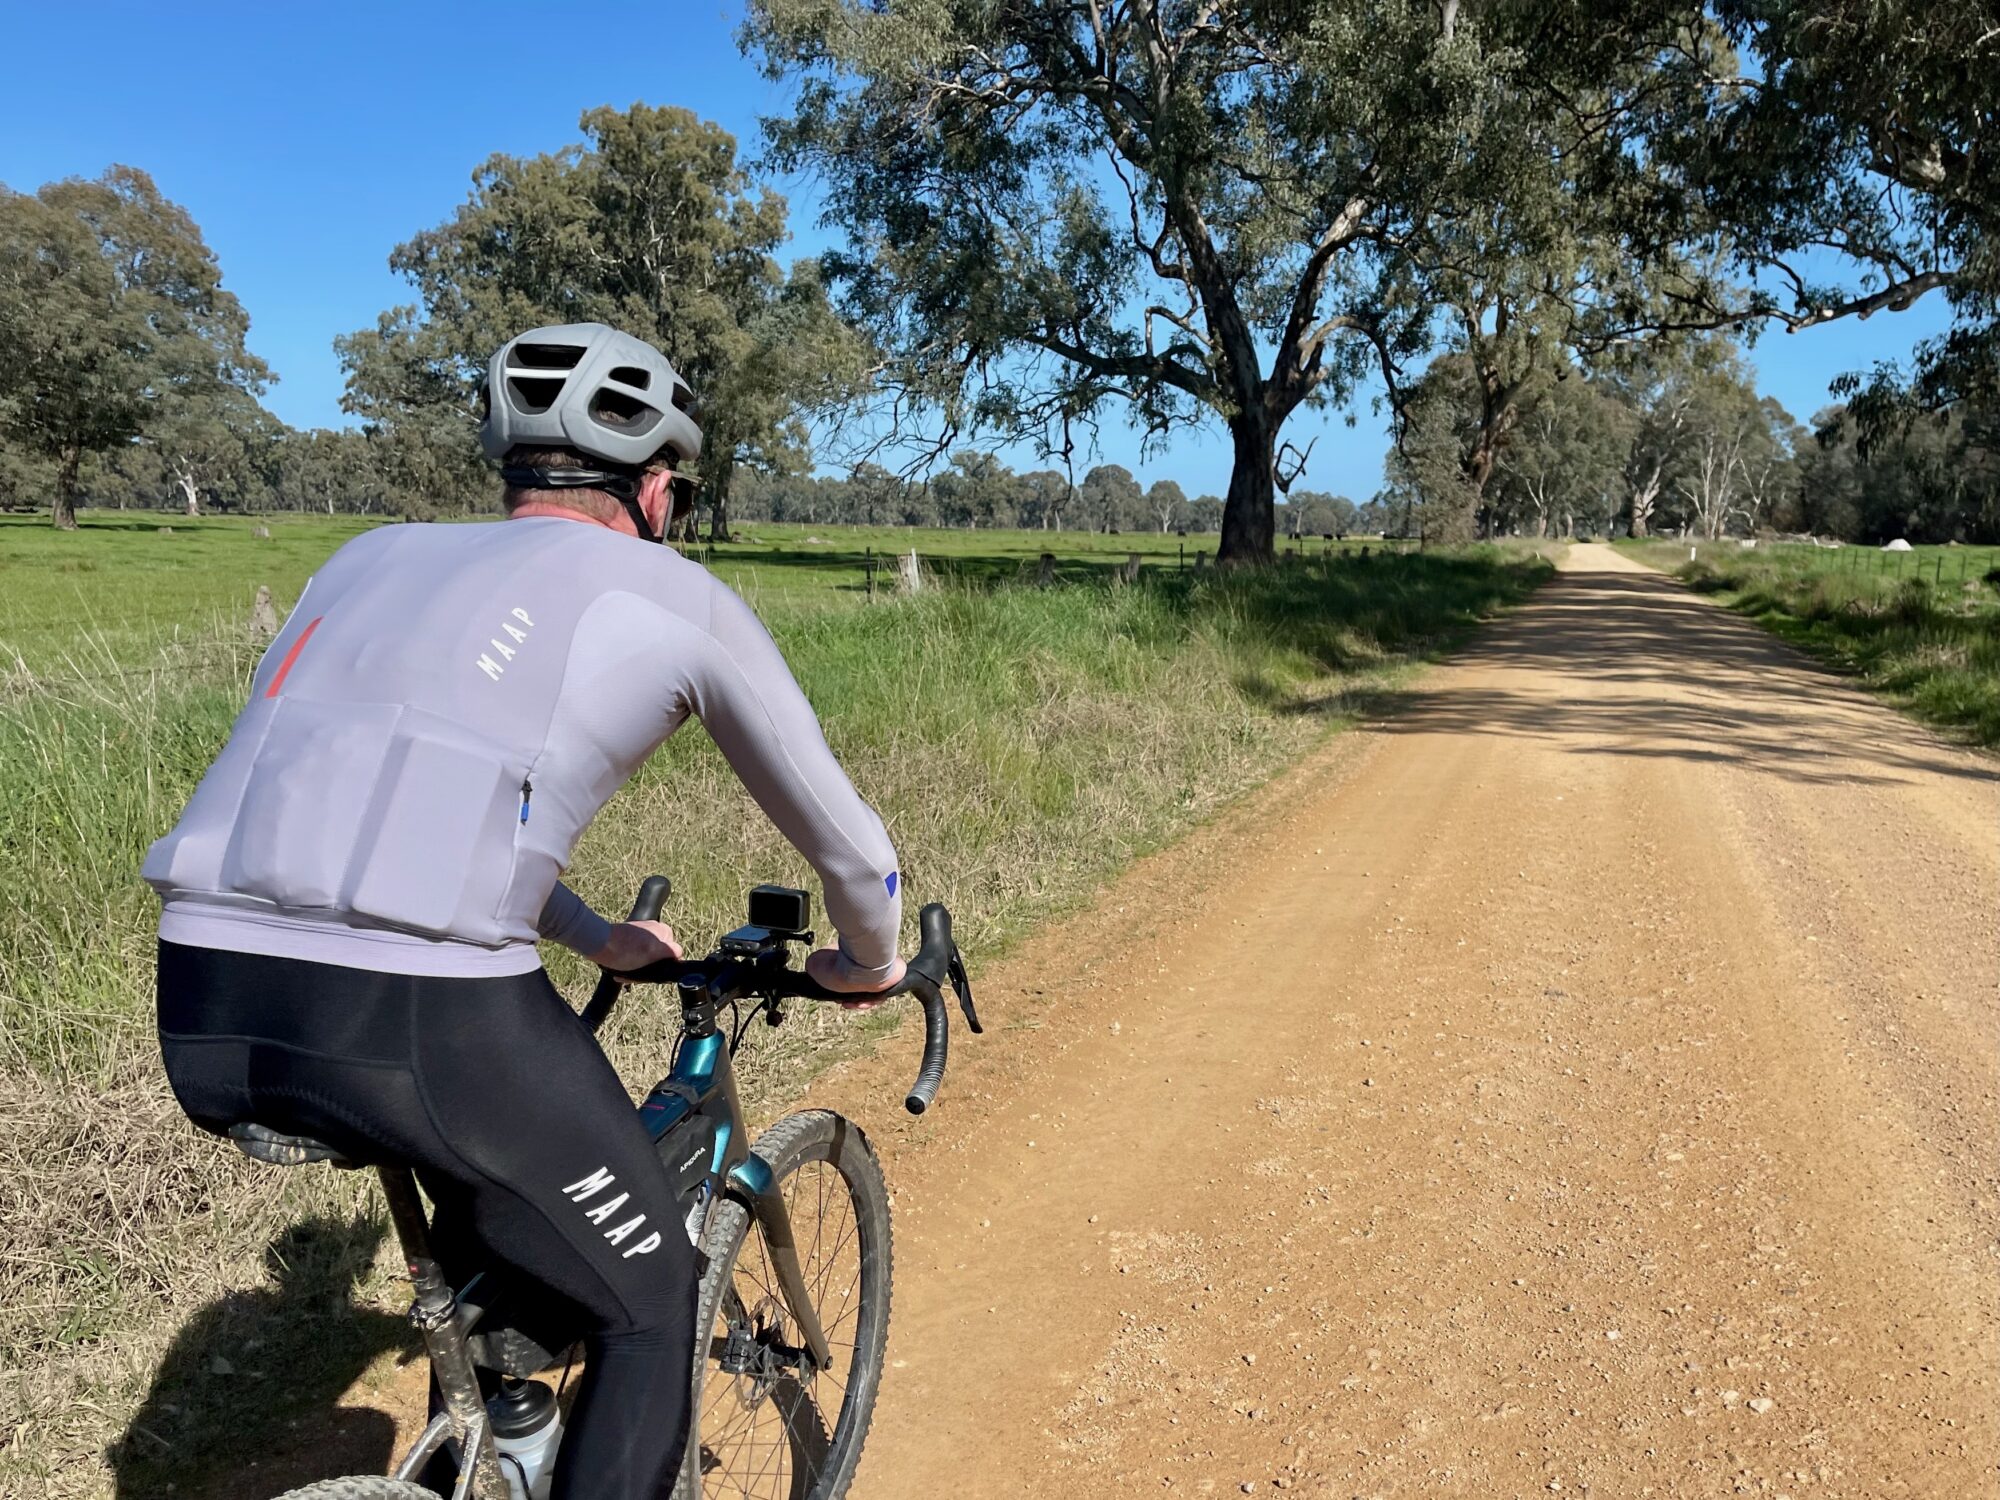 Cyclist riding on smooth gravel road with native trees in the distance